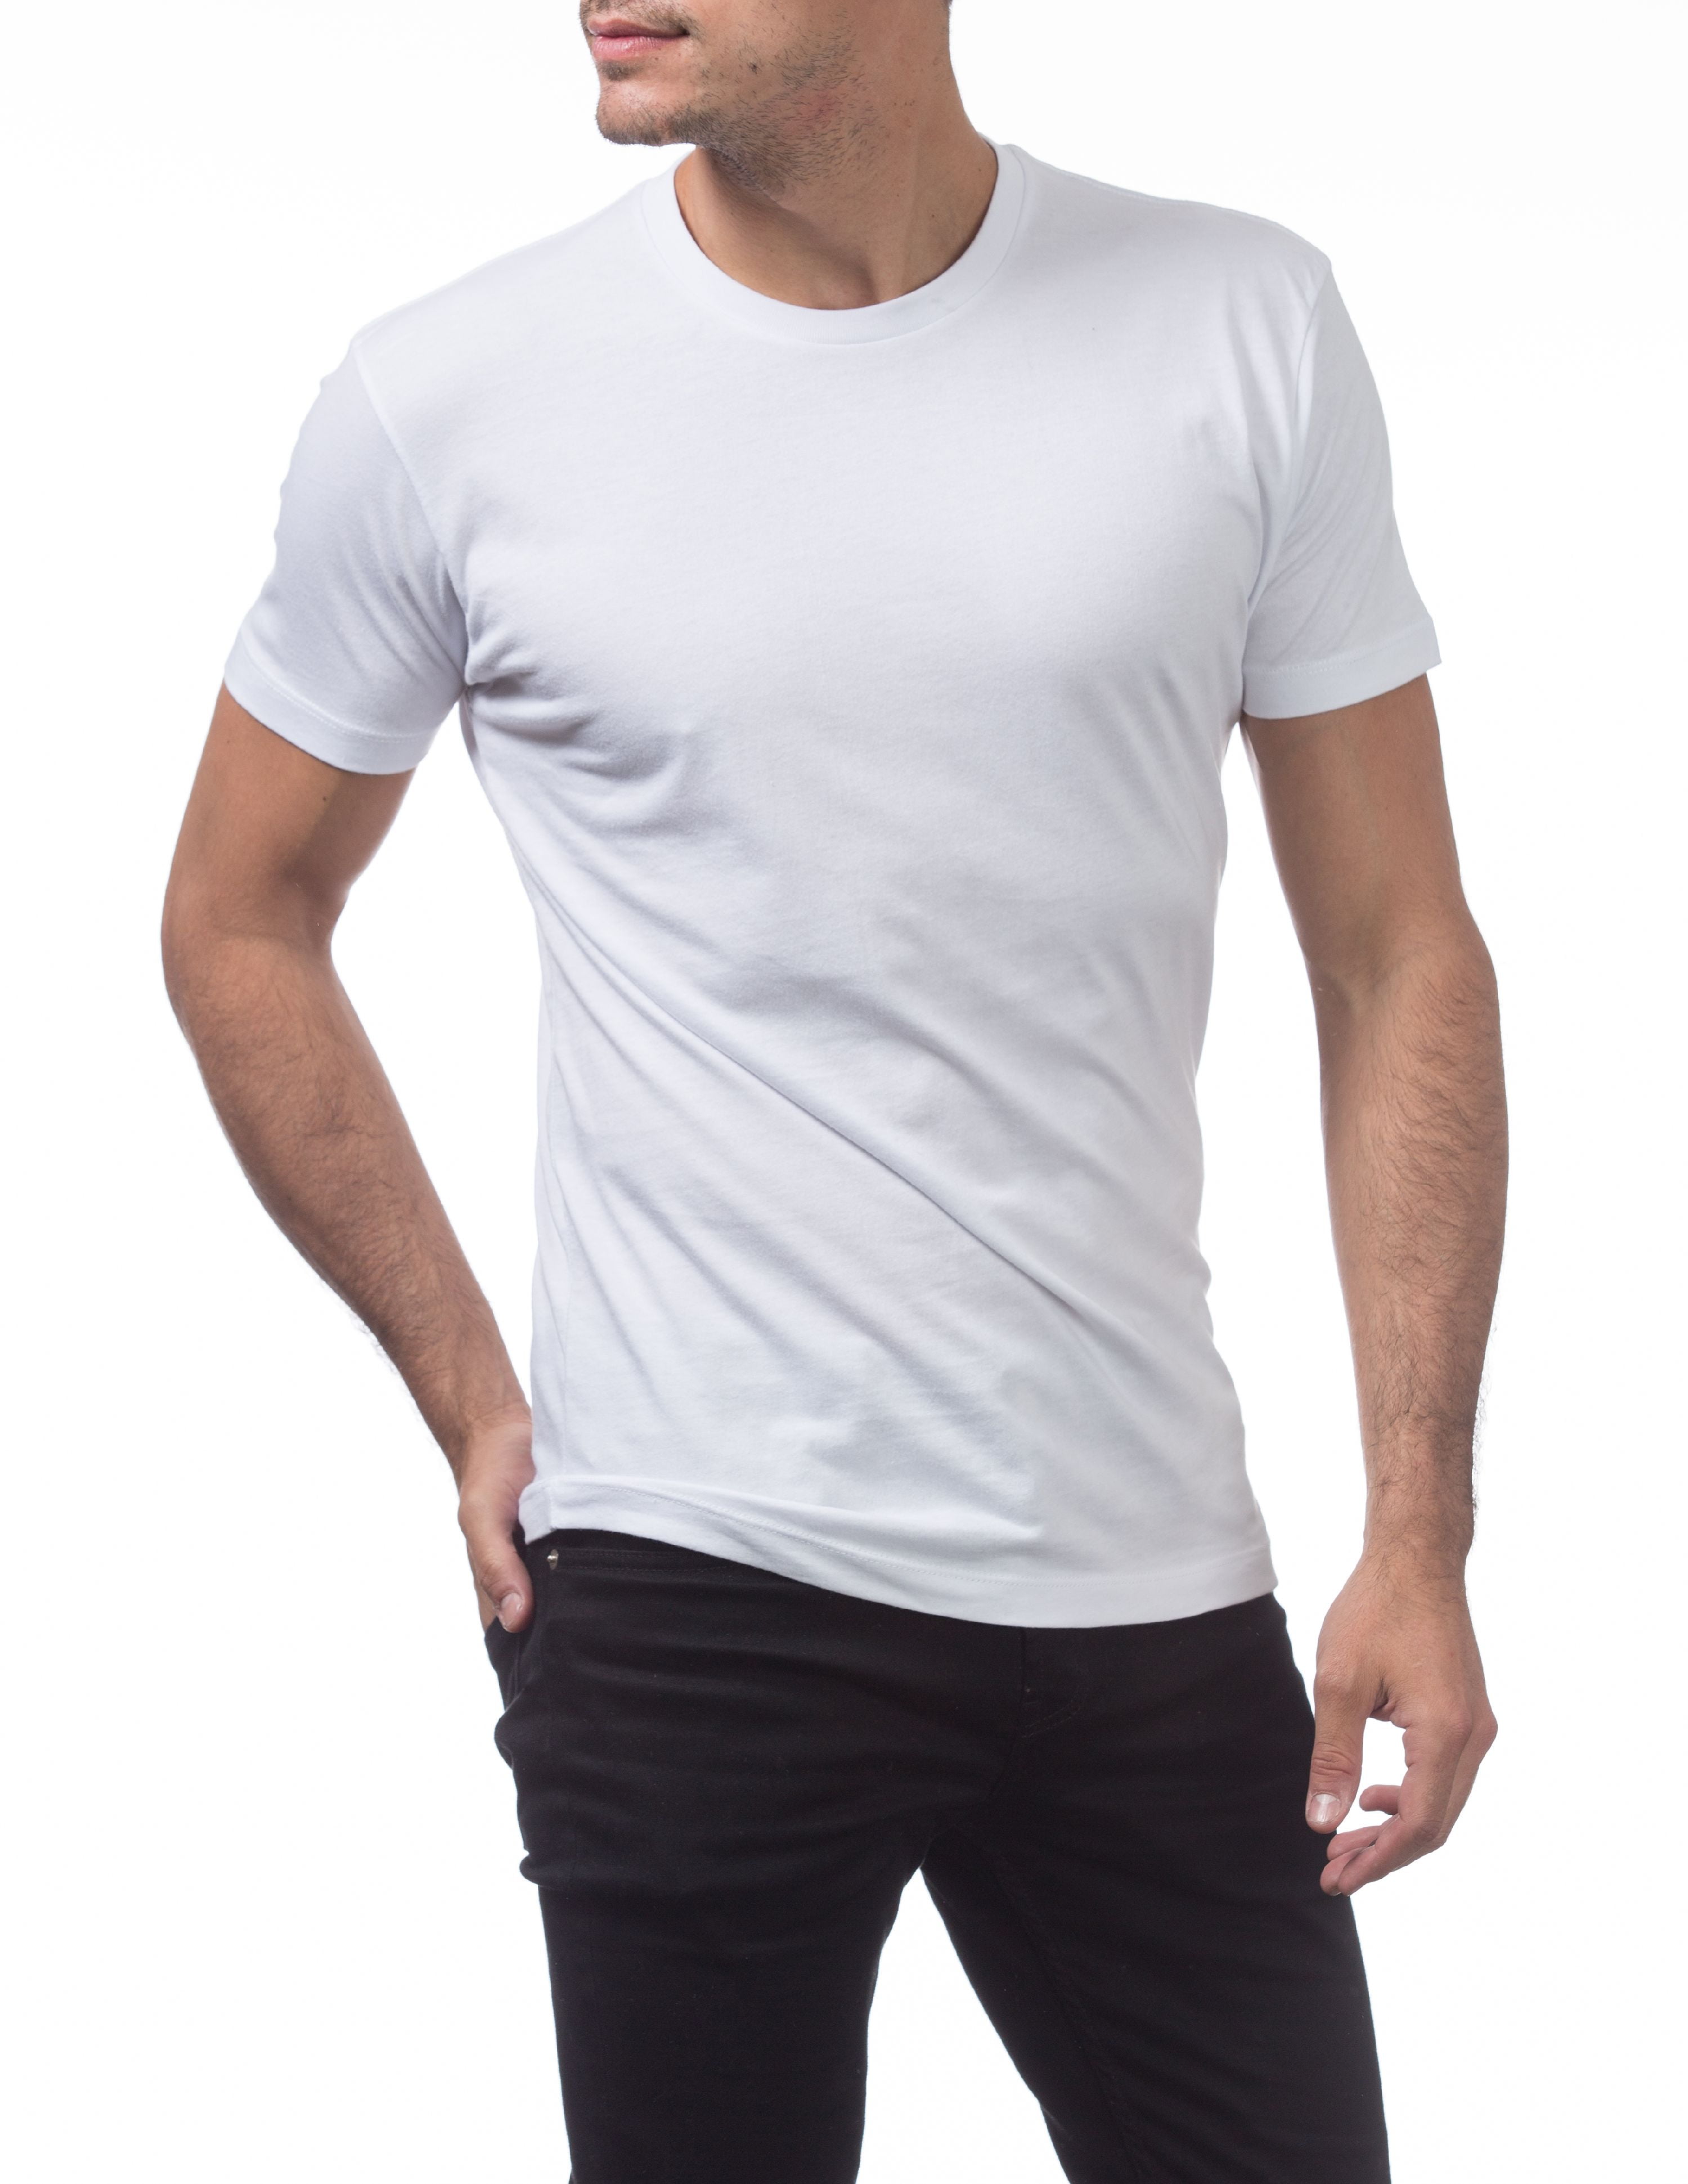 Pick Any One Collar T-shirt for Men by Mr. Tusker (TAP1)